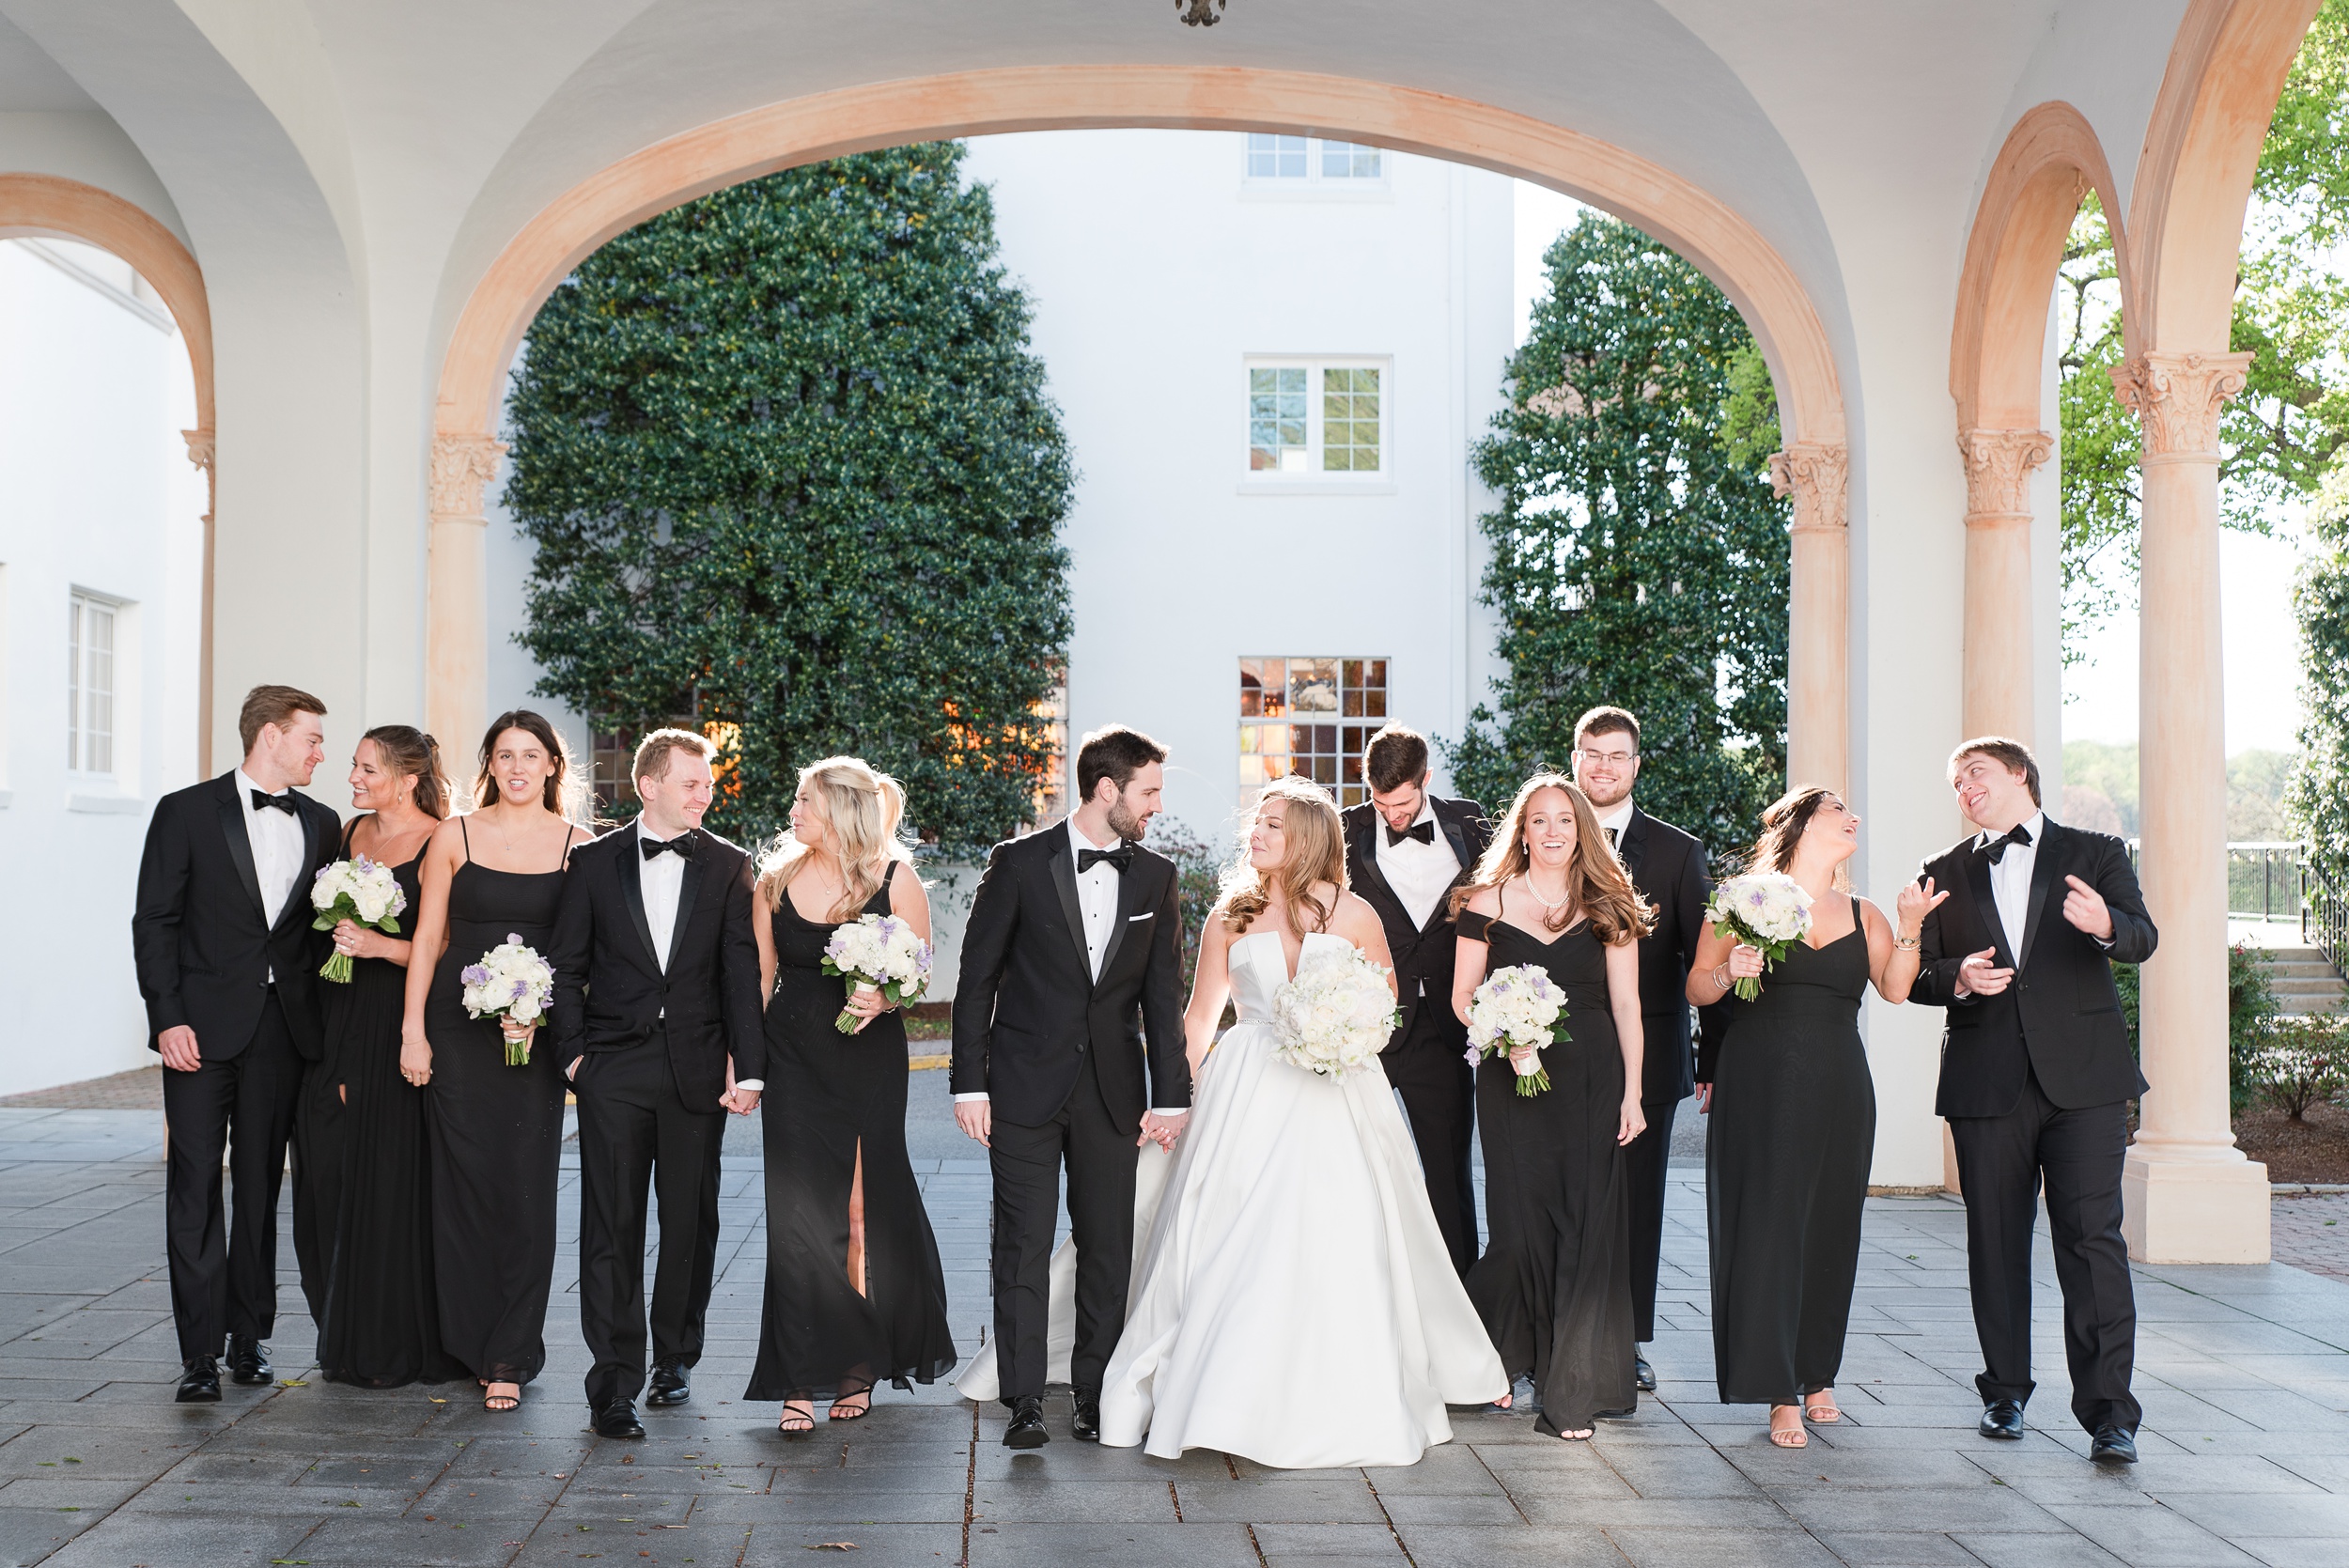 Newlyweds hold hands while walking with their large bridal party